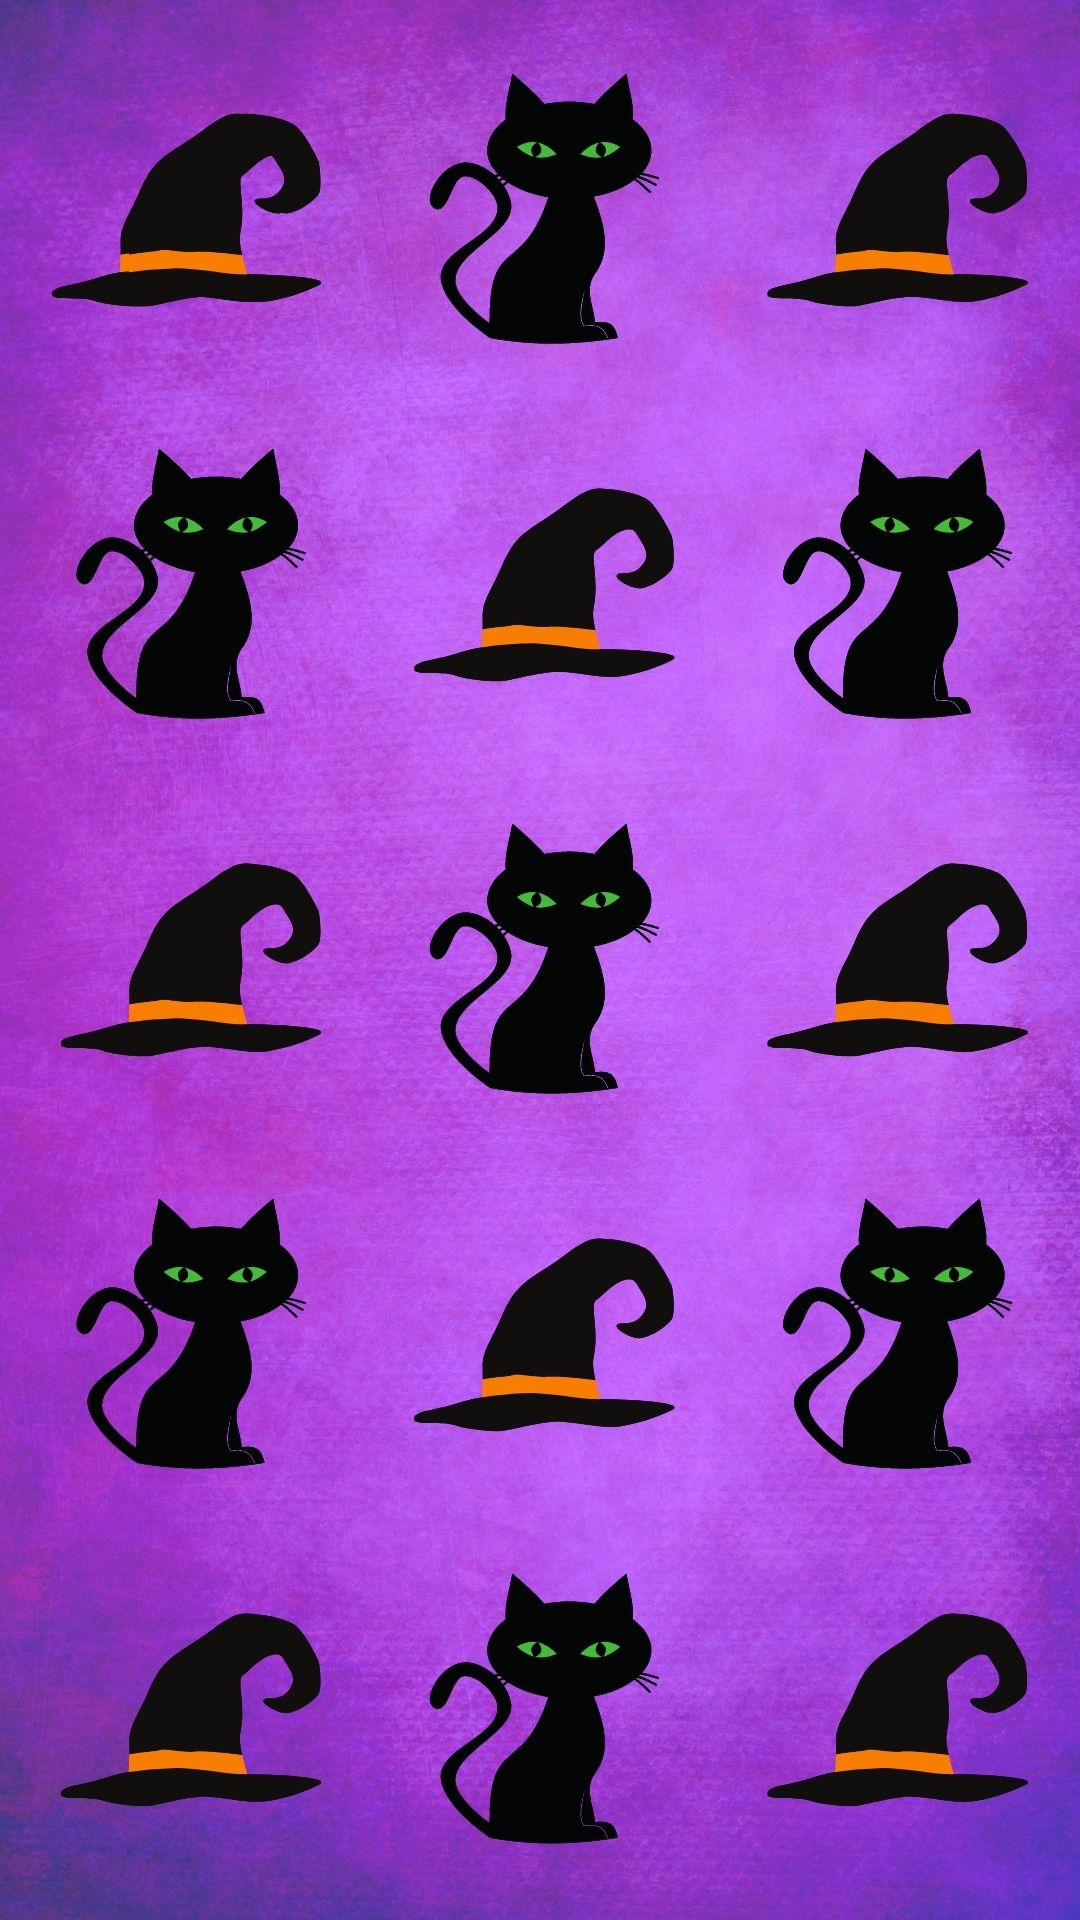 Black cats with green eyes, witches hat orange, purple background, cell phone wallpaper, iphone background, halloween, scary, spooky, cute